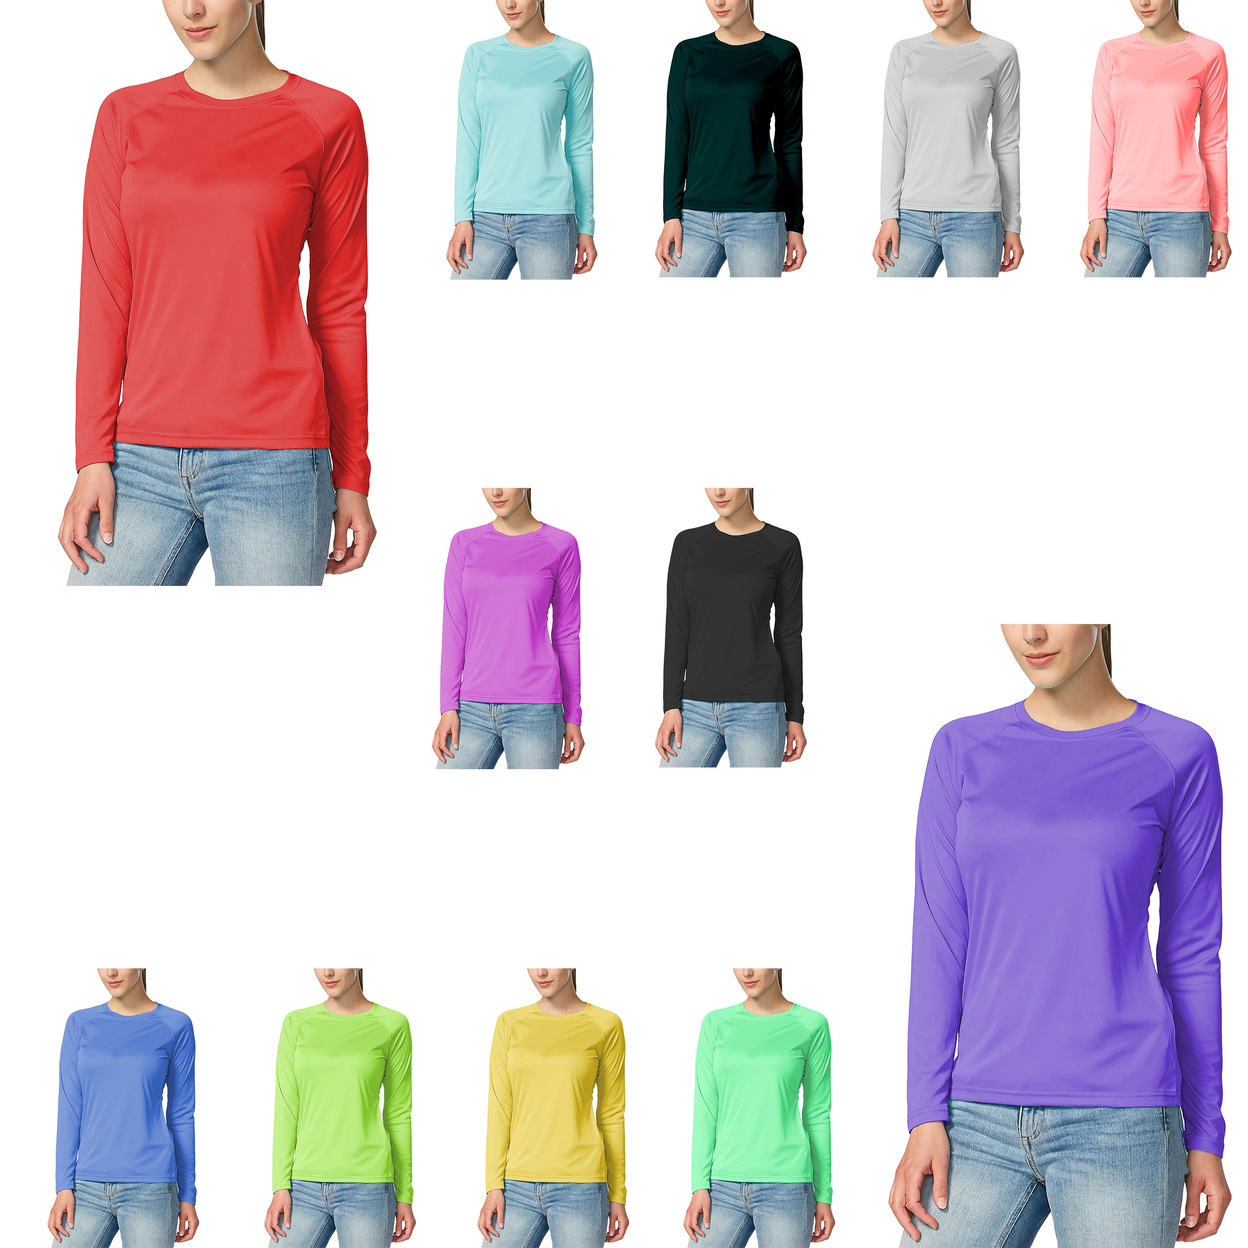 4-Pack: Women's Dri-Fit Moisture-Wicking Breathable Long Sleeve T-Shirt - X-large